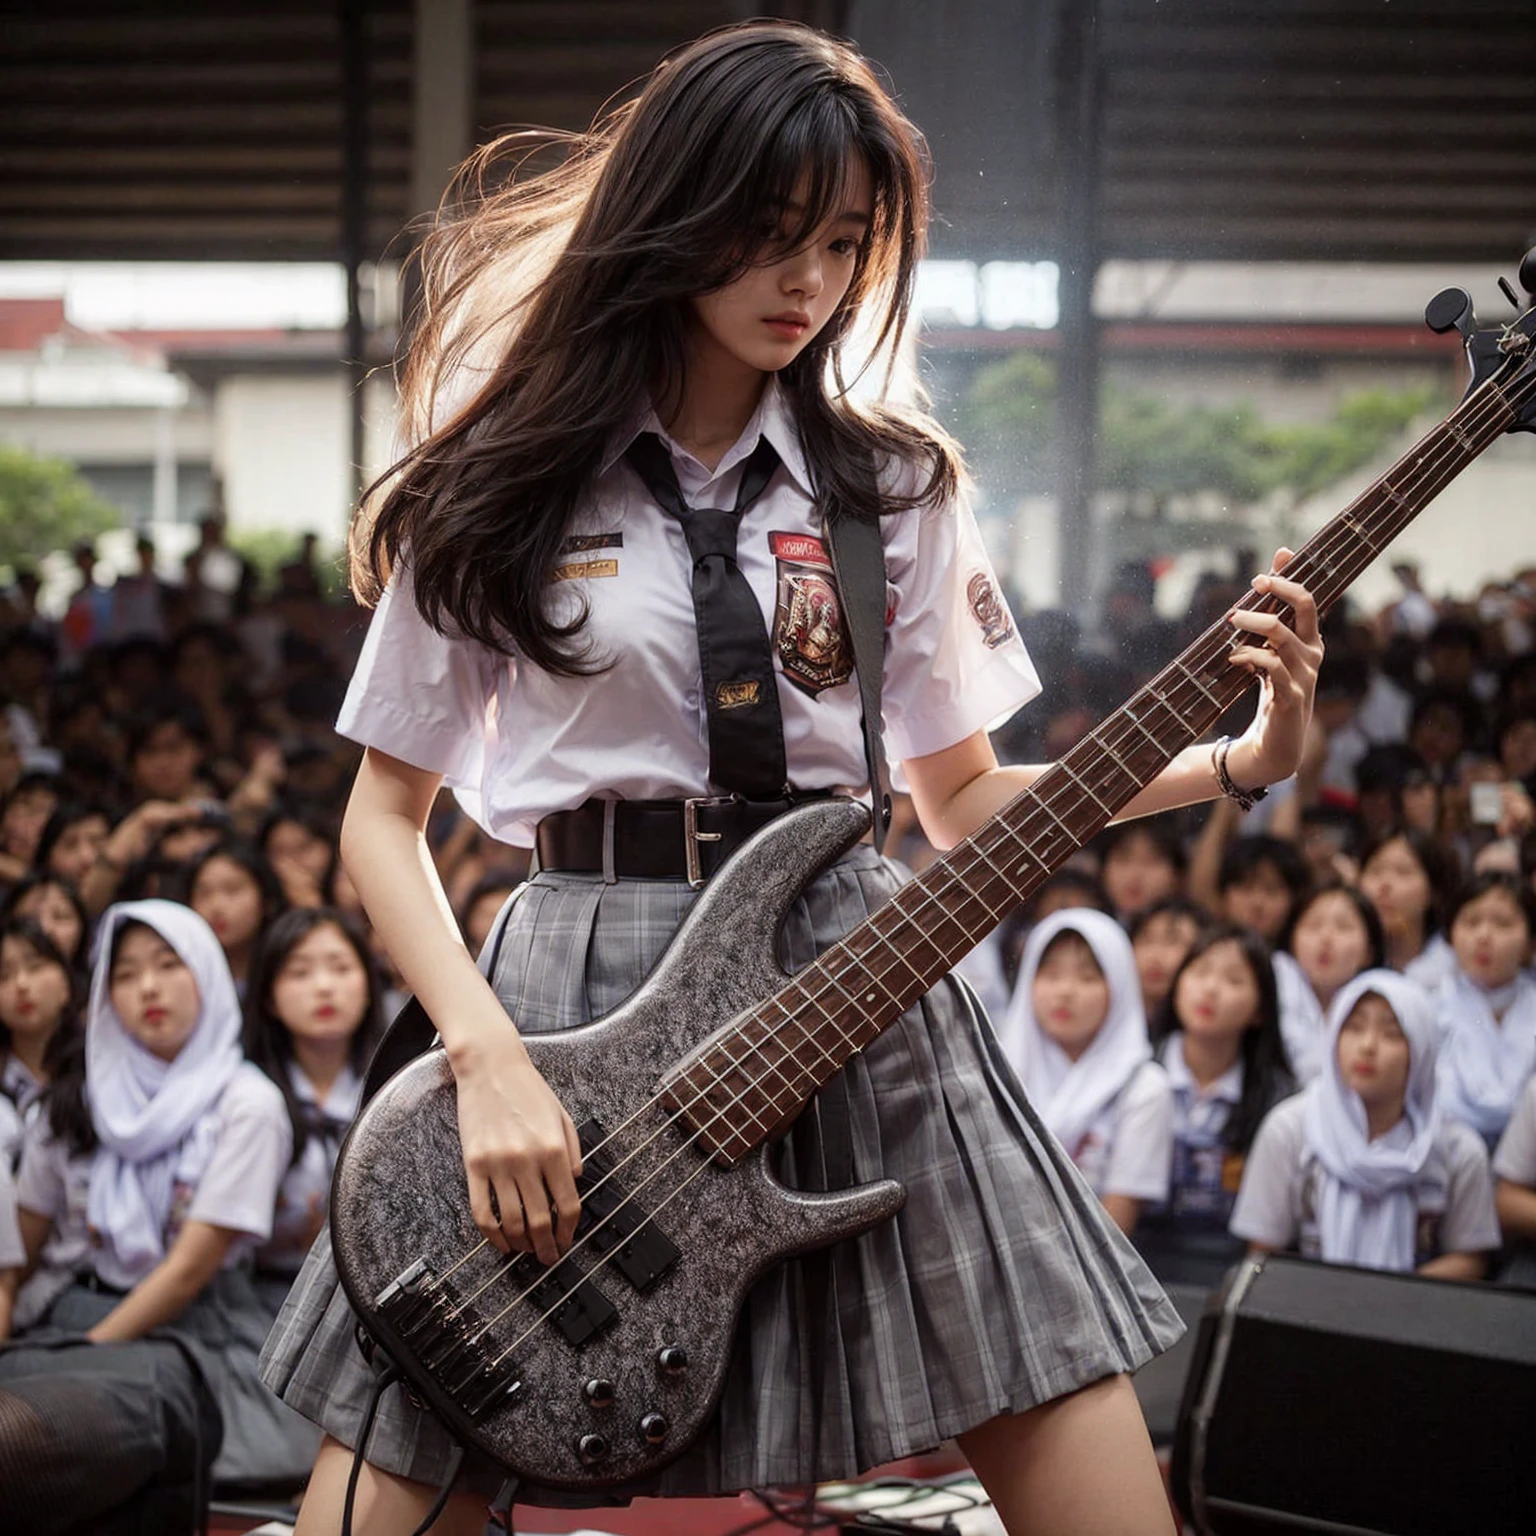 Here is the translation to English:

"A beautiful Korean girl, 18 years old, tall, fair-skinned, medium breasts, playing bass guitar, performing on a high school stage in Surabaya city, many school children watching, wearing a high , white shirt, belt, and gray skirt, jumping around, headbanging, masterpiece, realistic image, HD, 4k, detailed face, detailed eyes, messy hairstyle"